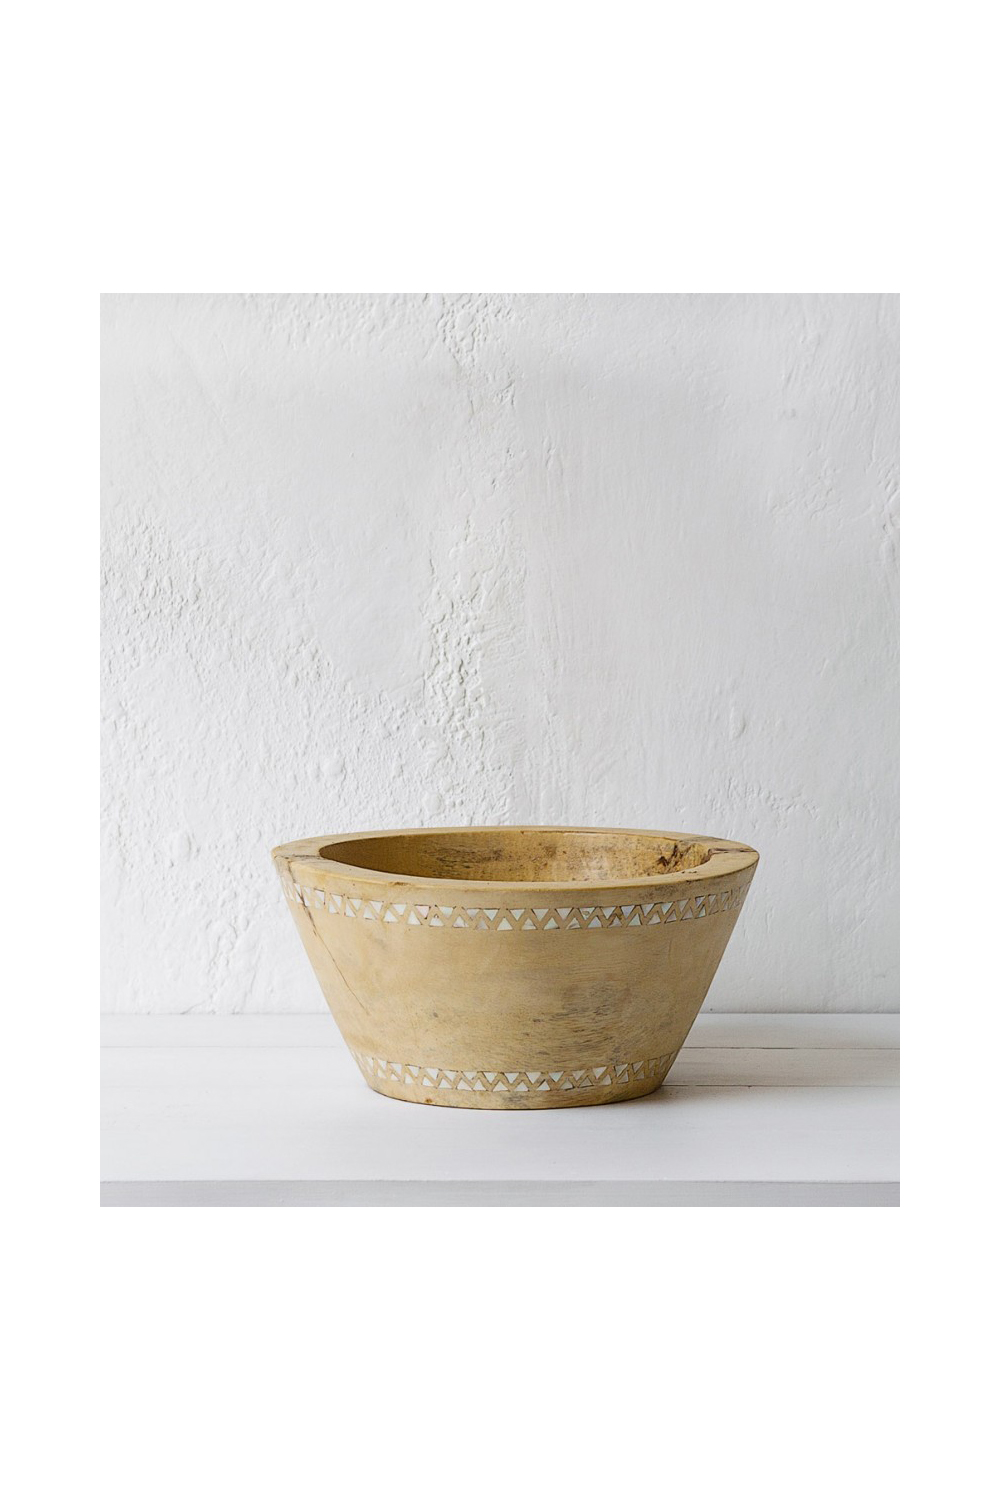 Indie Home collective bowl, $135